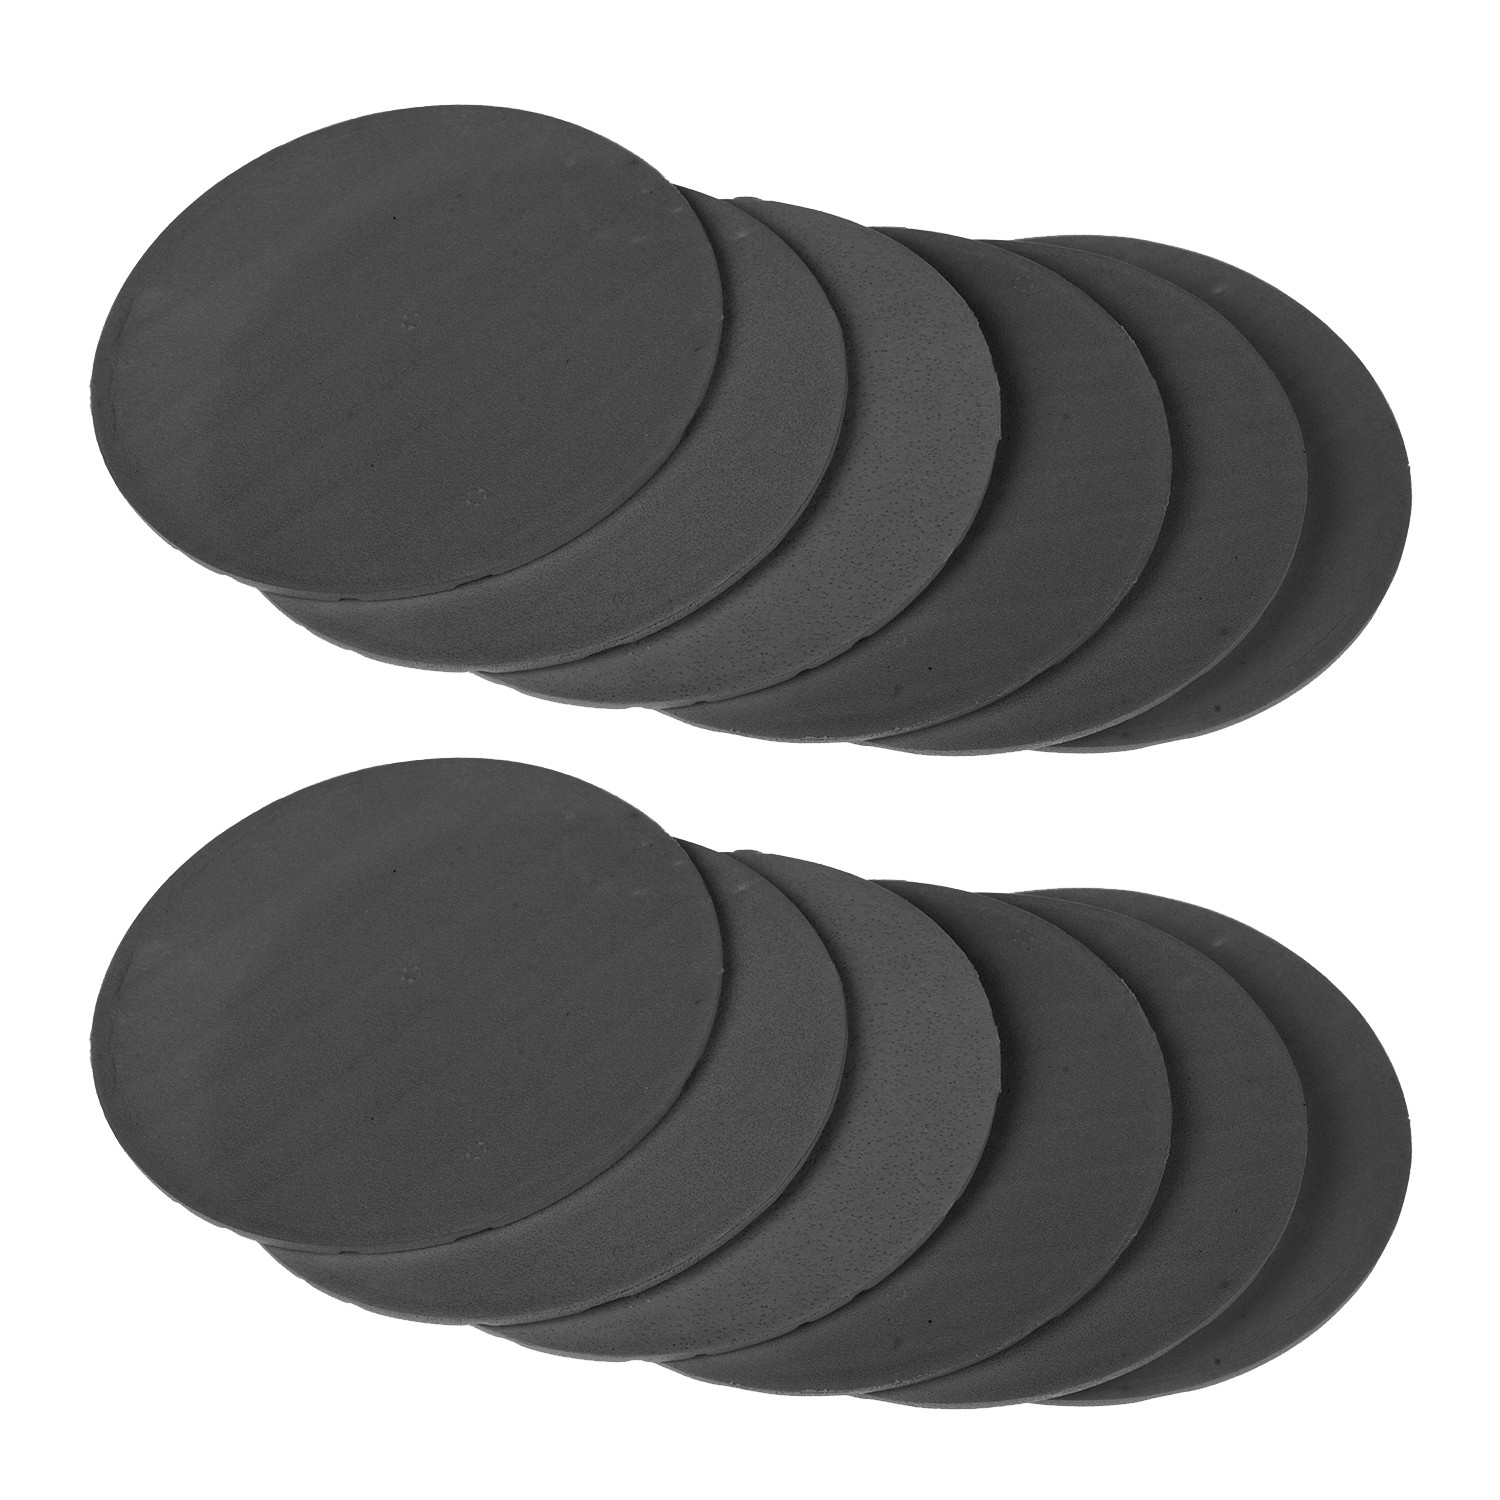 Kuber Industries Coaster | Round Drink Coasters | Foam Tea Coasters for Kitchen | Coasters for Dining Table | Office Desk Coasters | Lining Round Coaster |Gray